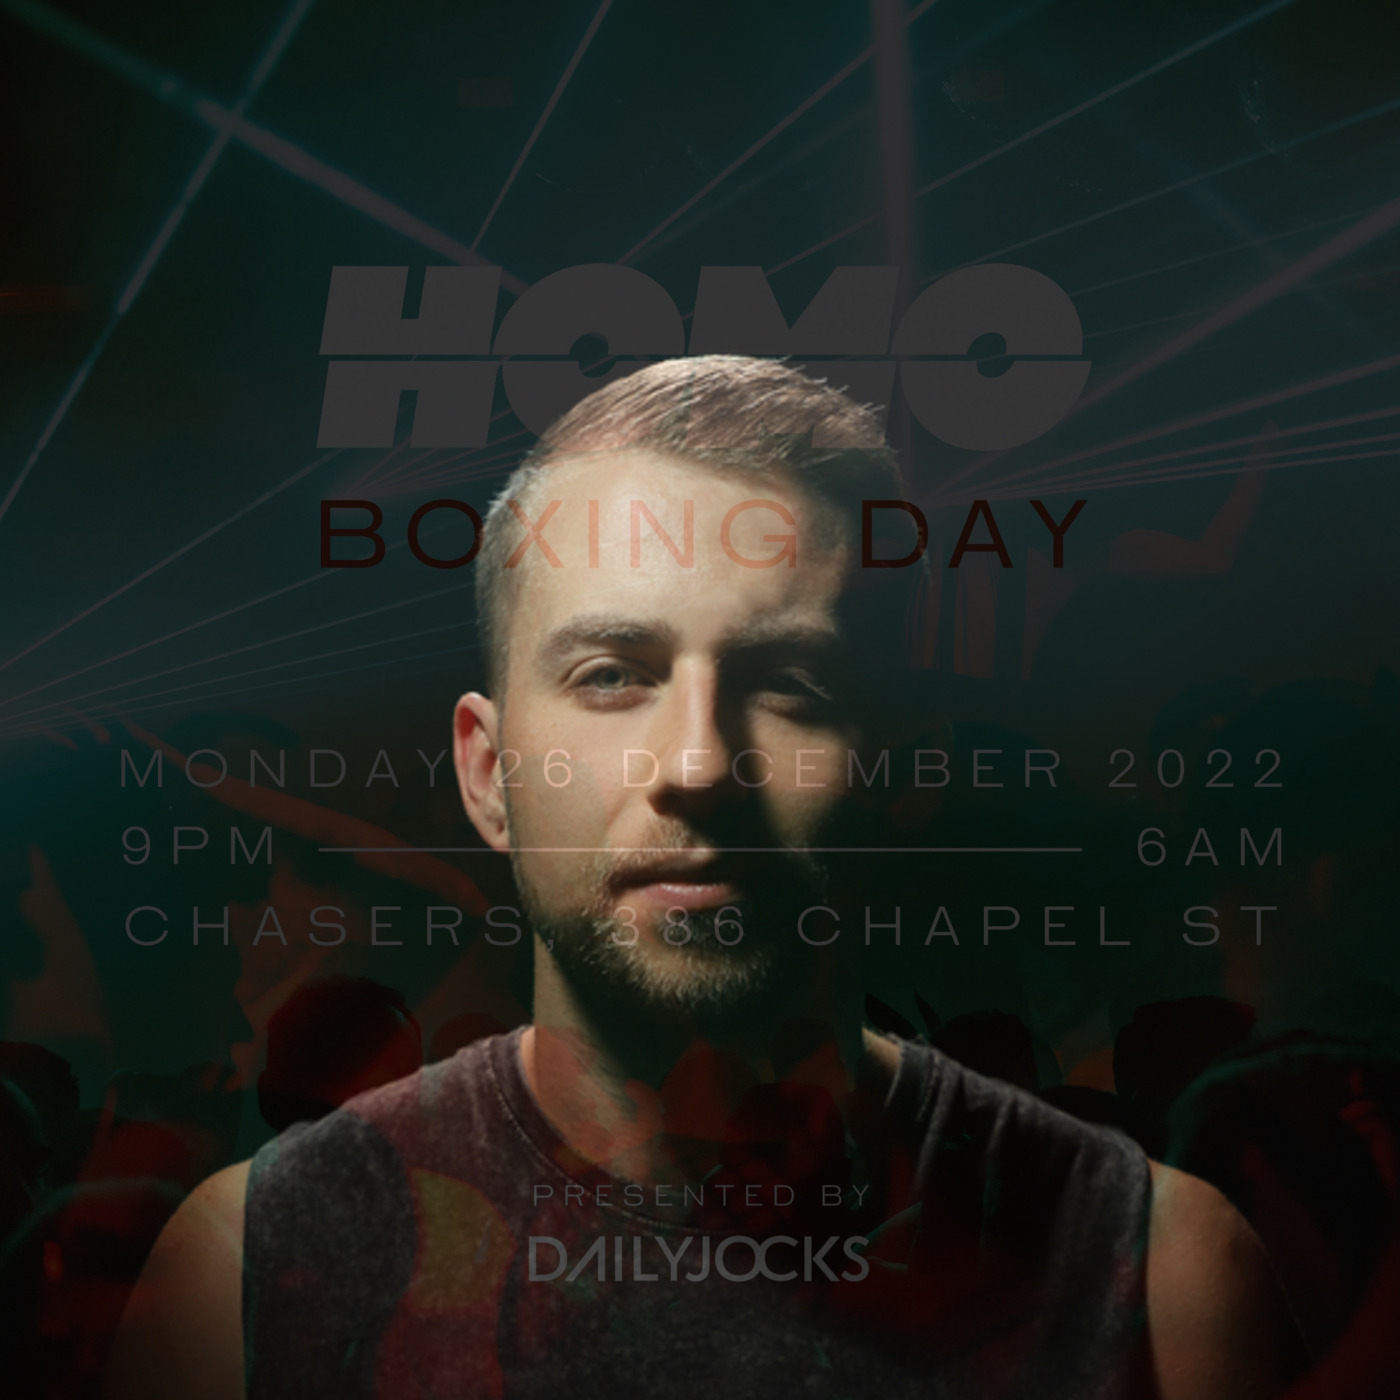 Episode 46: Live DJ Set - HOMO Events at Chasers, Melbourne Boxing Day 2022